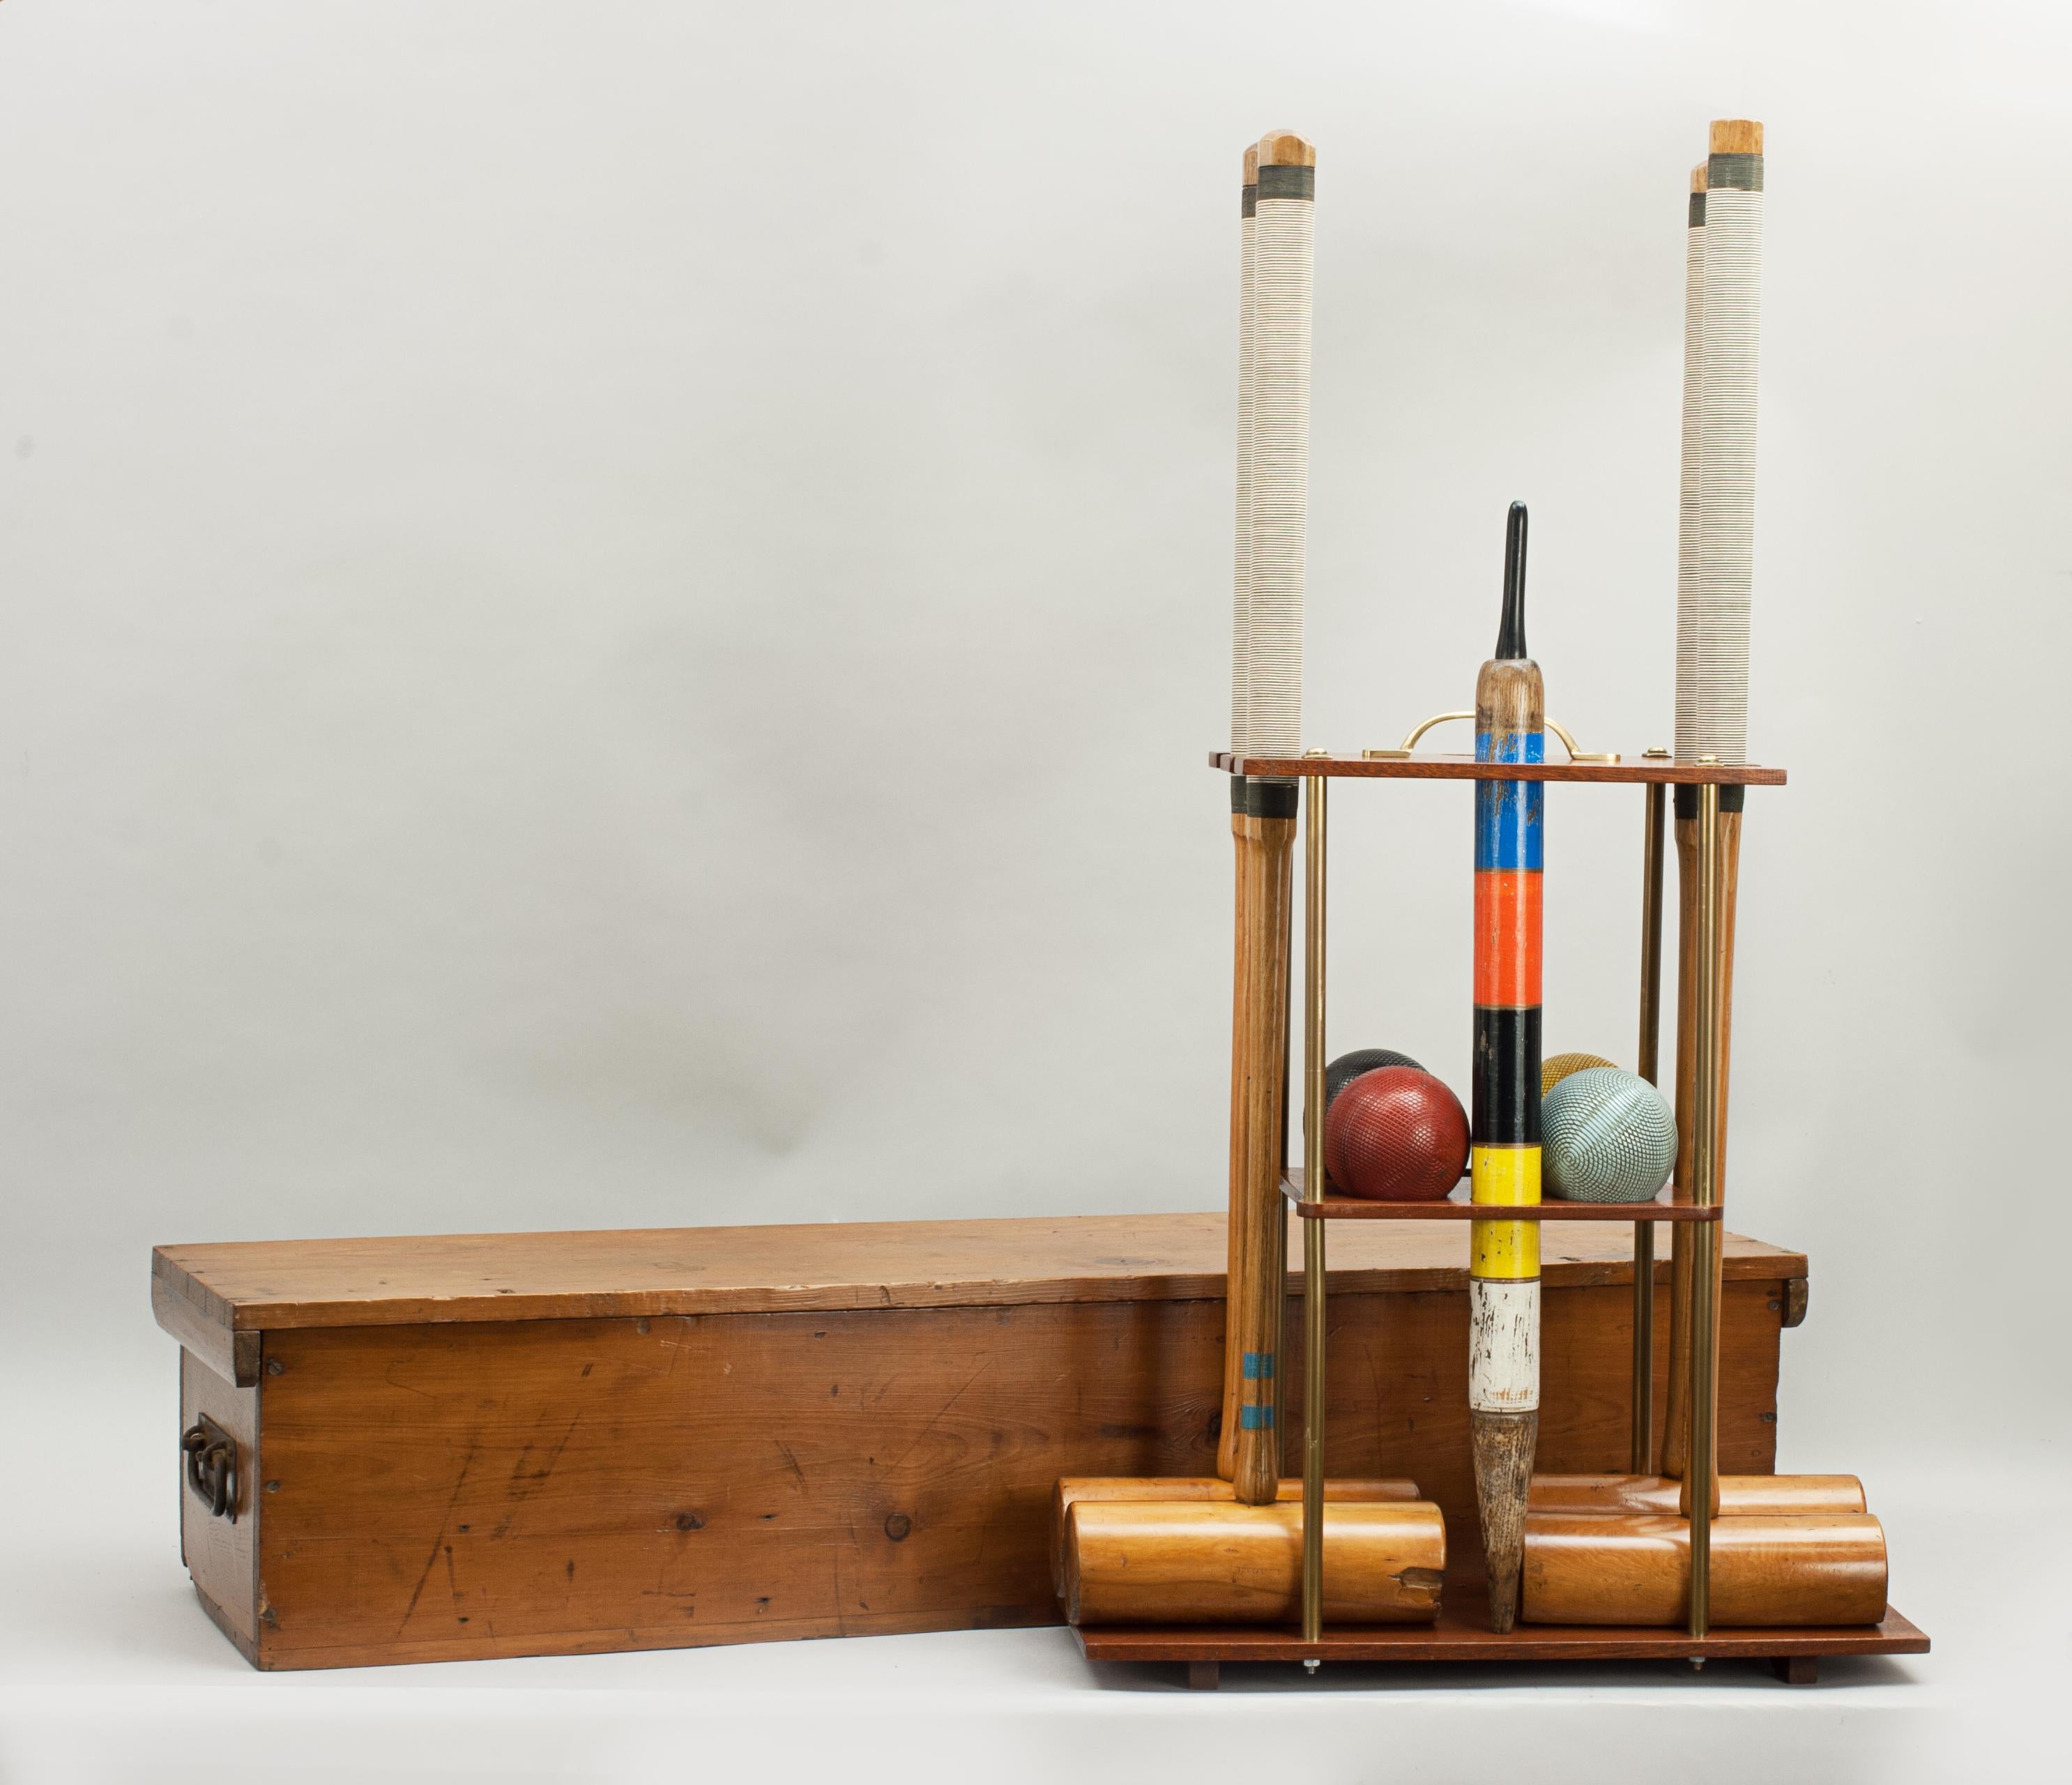 Vintage croquet set in pine box.
A four mallet croquet set on a mahogany stand and with a polished pine box. Three of the mallets are stamped 'A & N.C.S.L', which stands for Army and Navy Co-Op Society Ltd, and the forth is stamped 'THE PEEL'